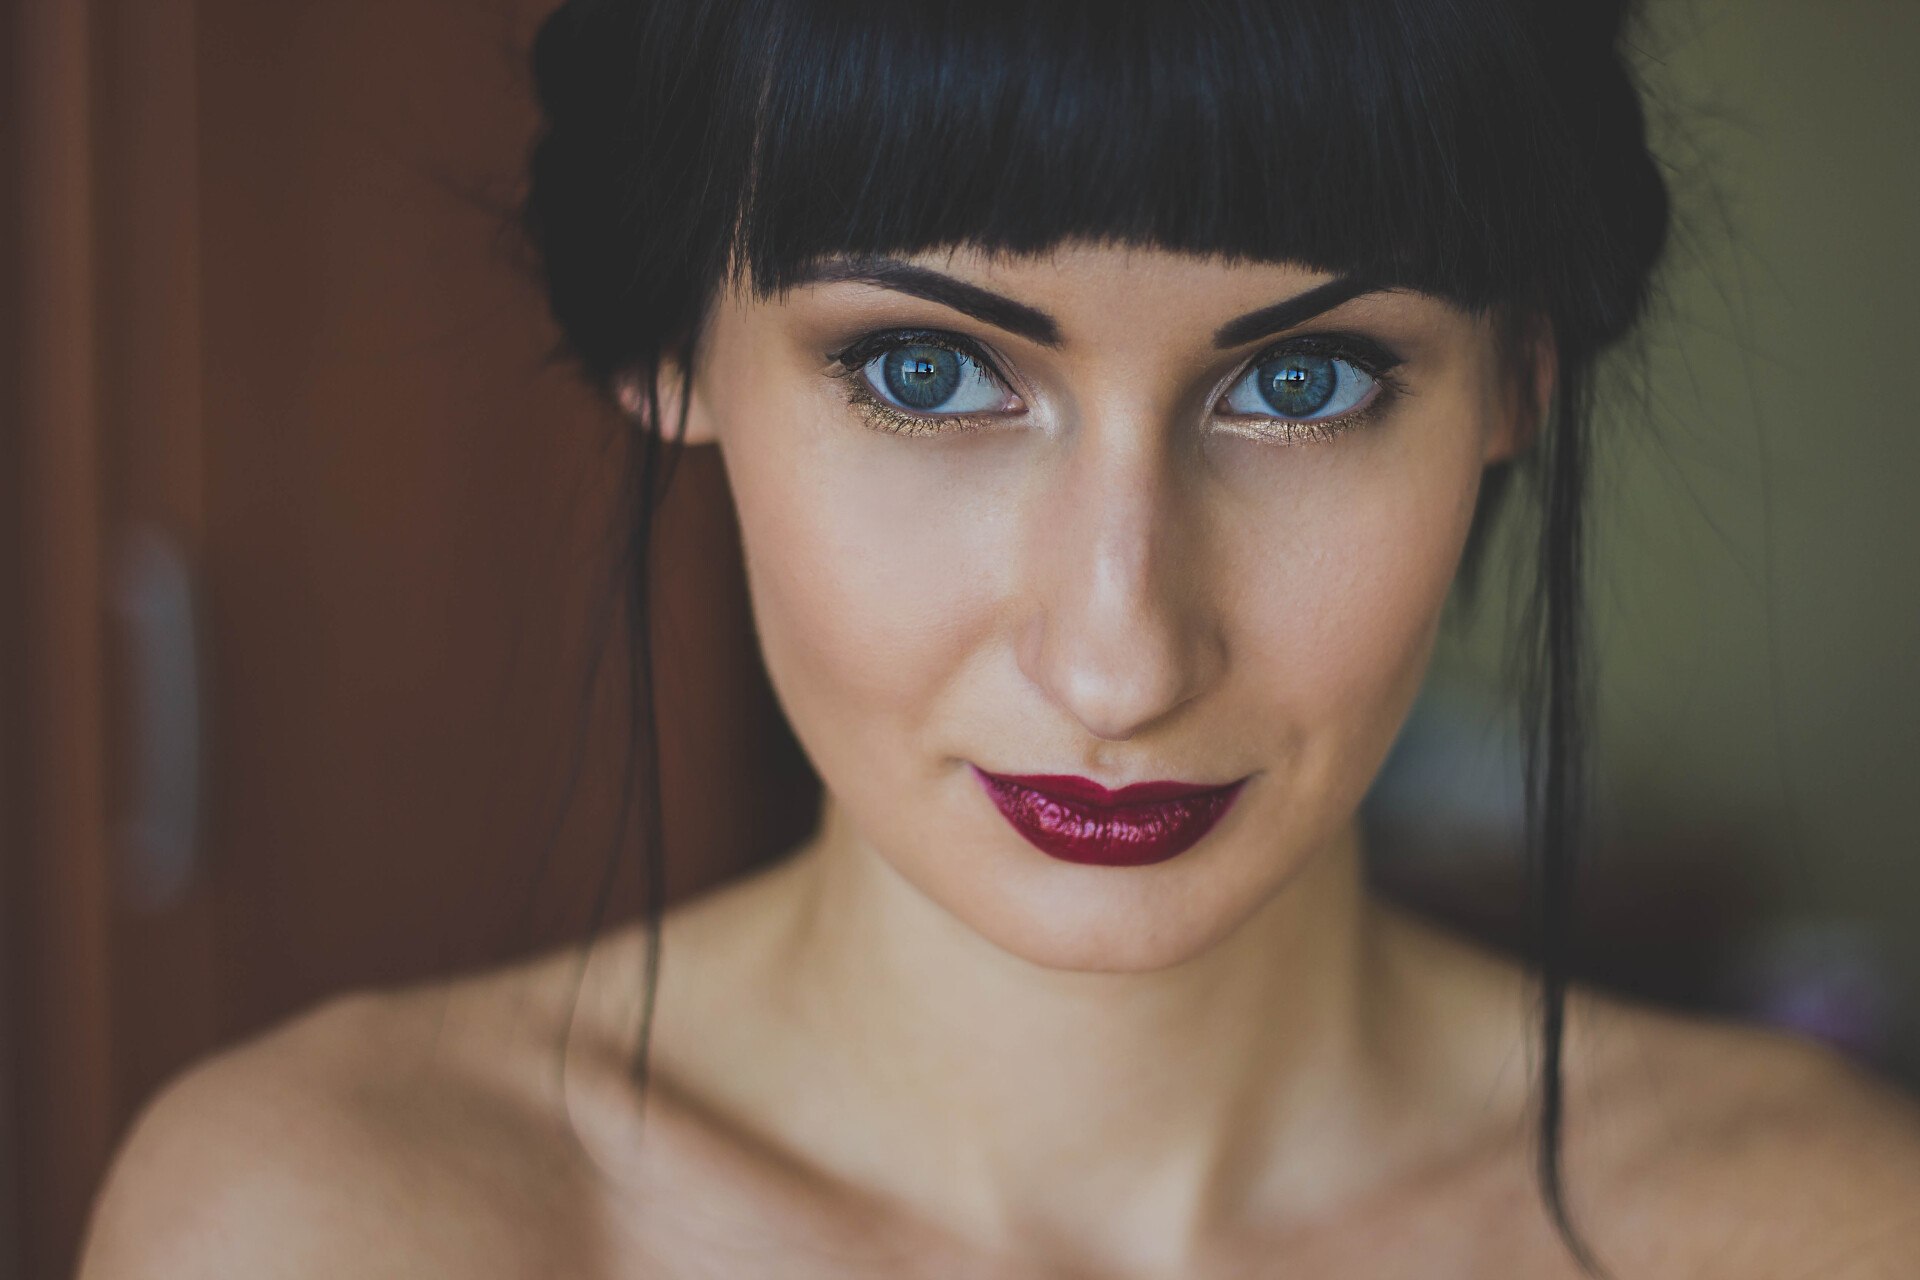 Dating A Czech Woman: How To Find, Date And Marry